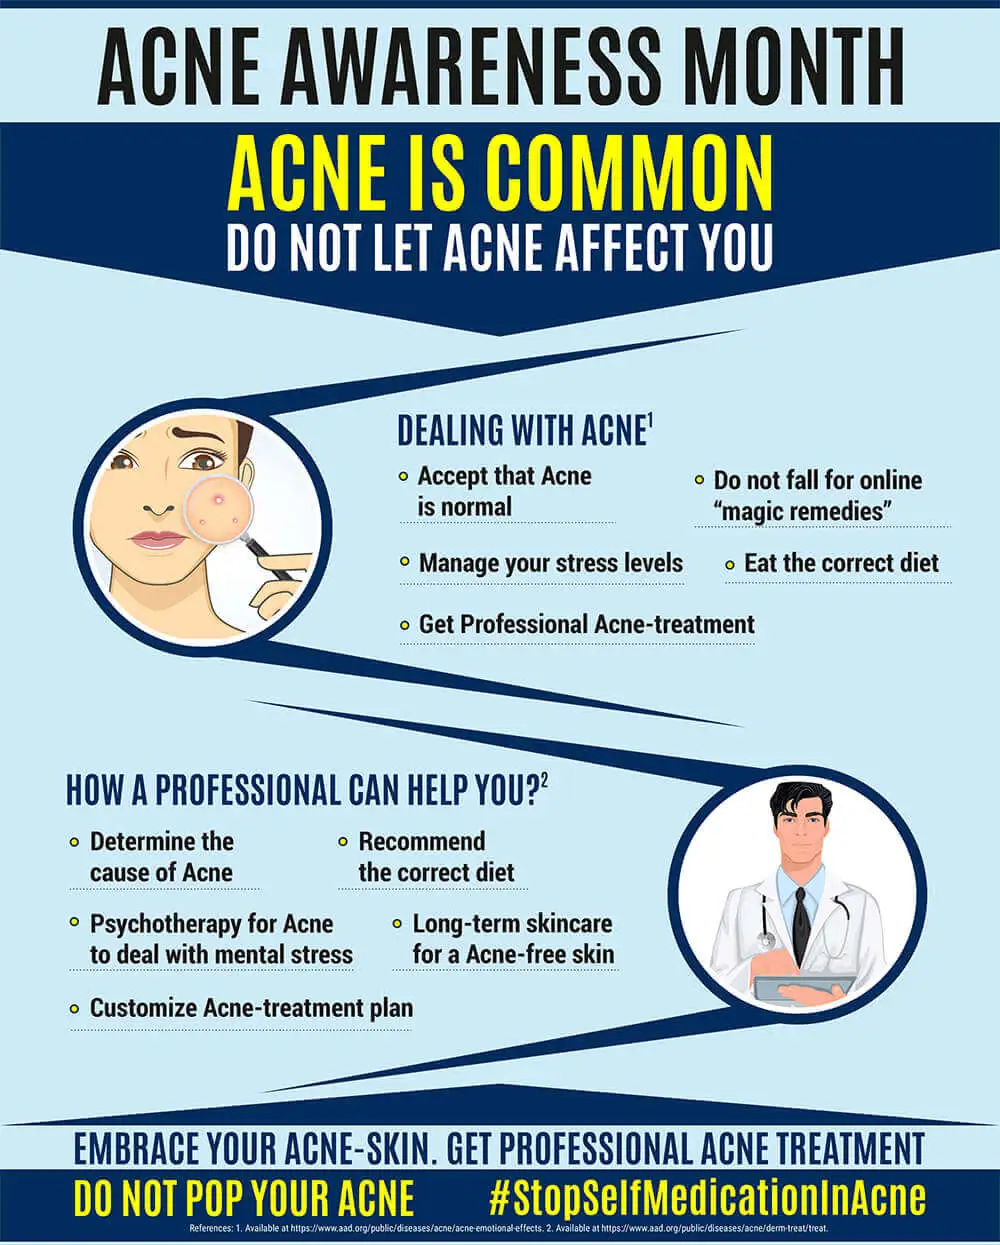 DEALING WITH ACNE